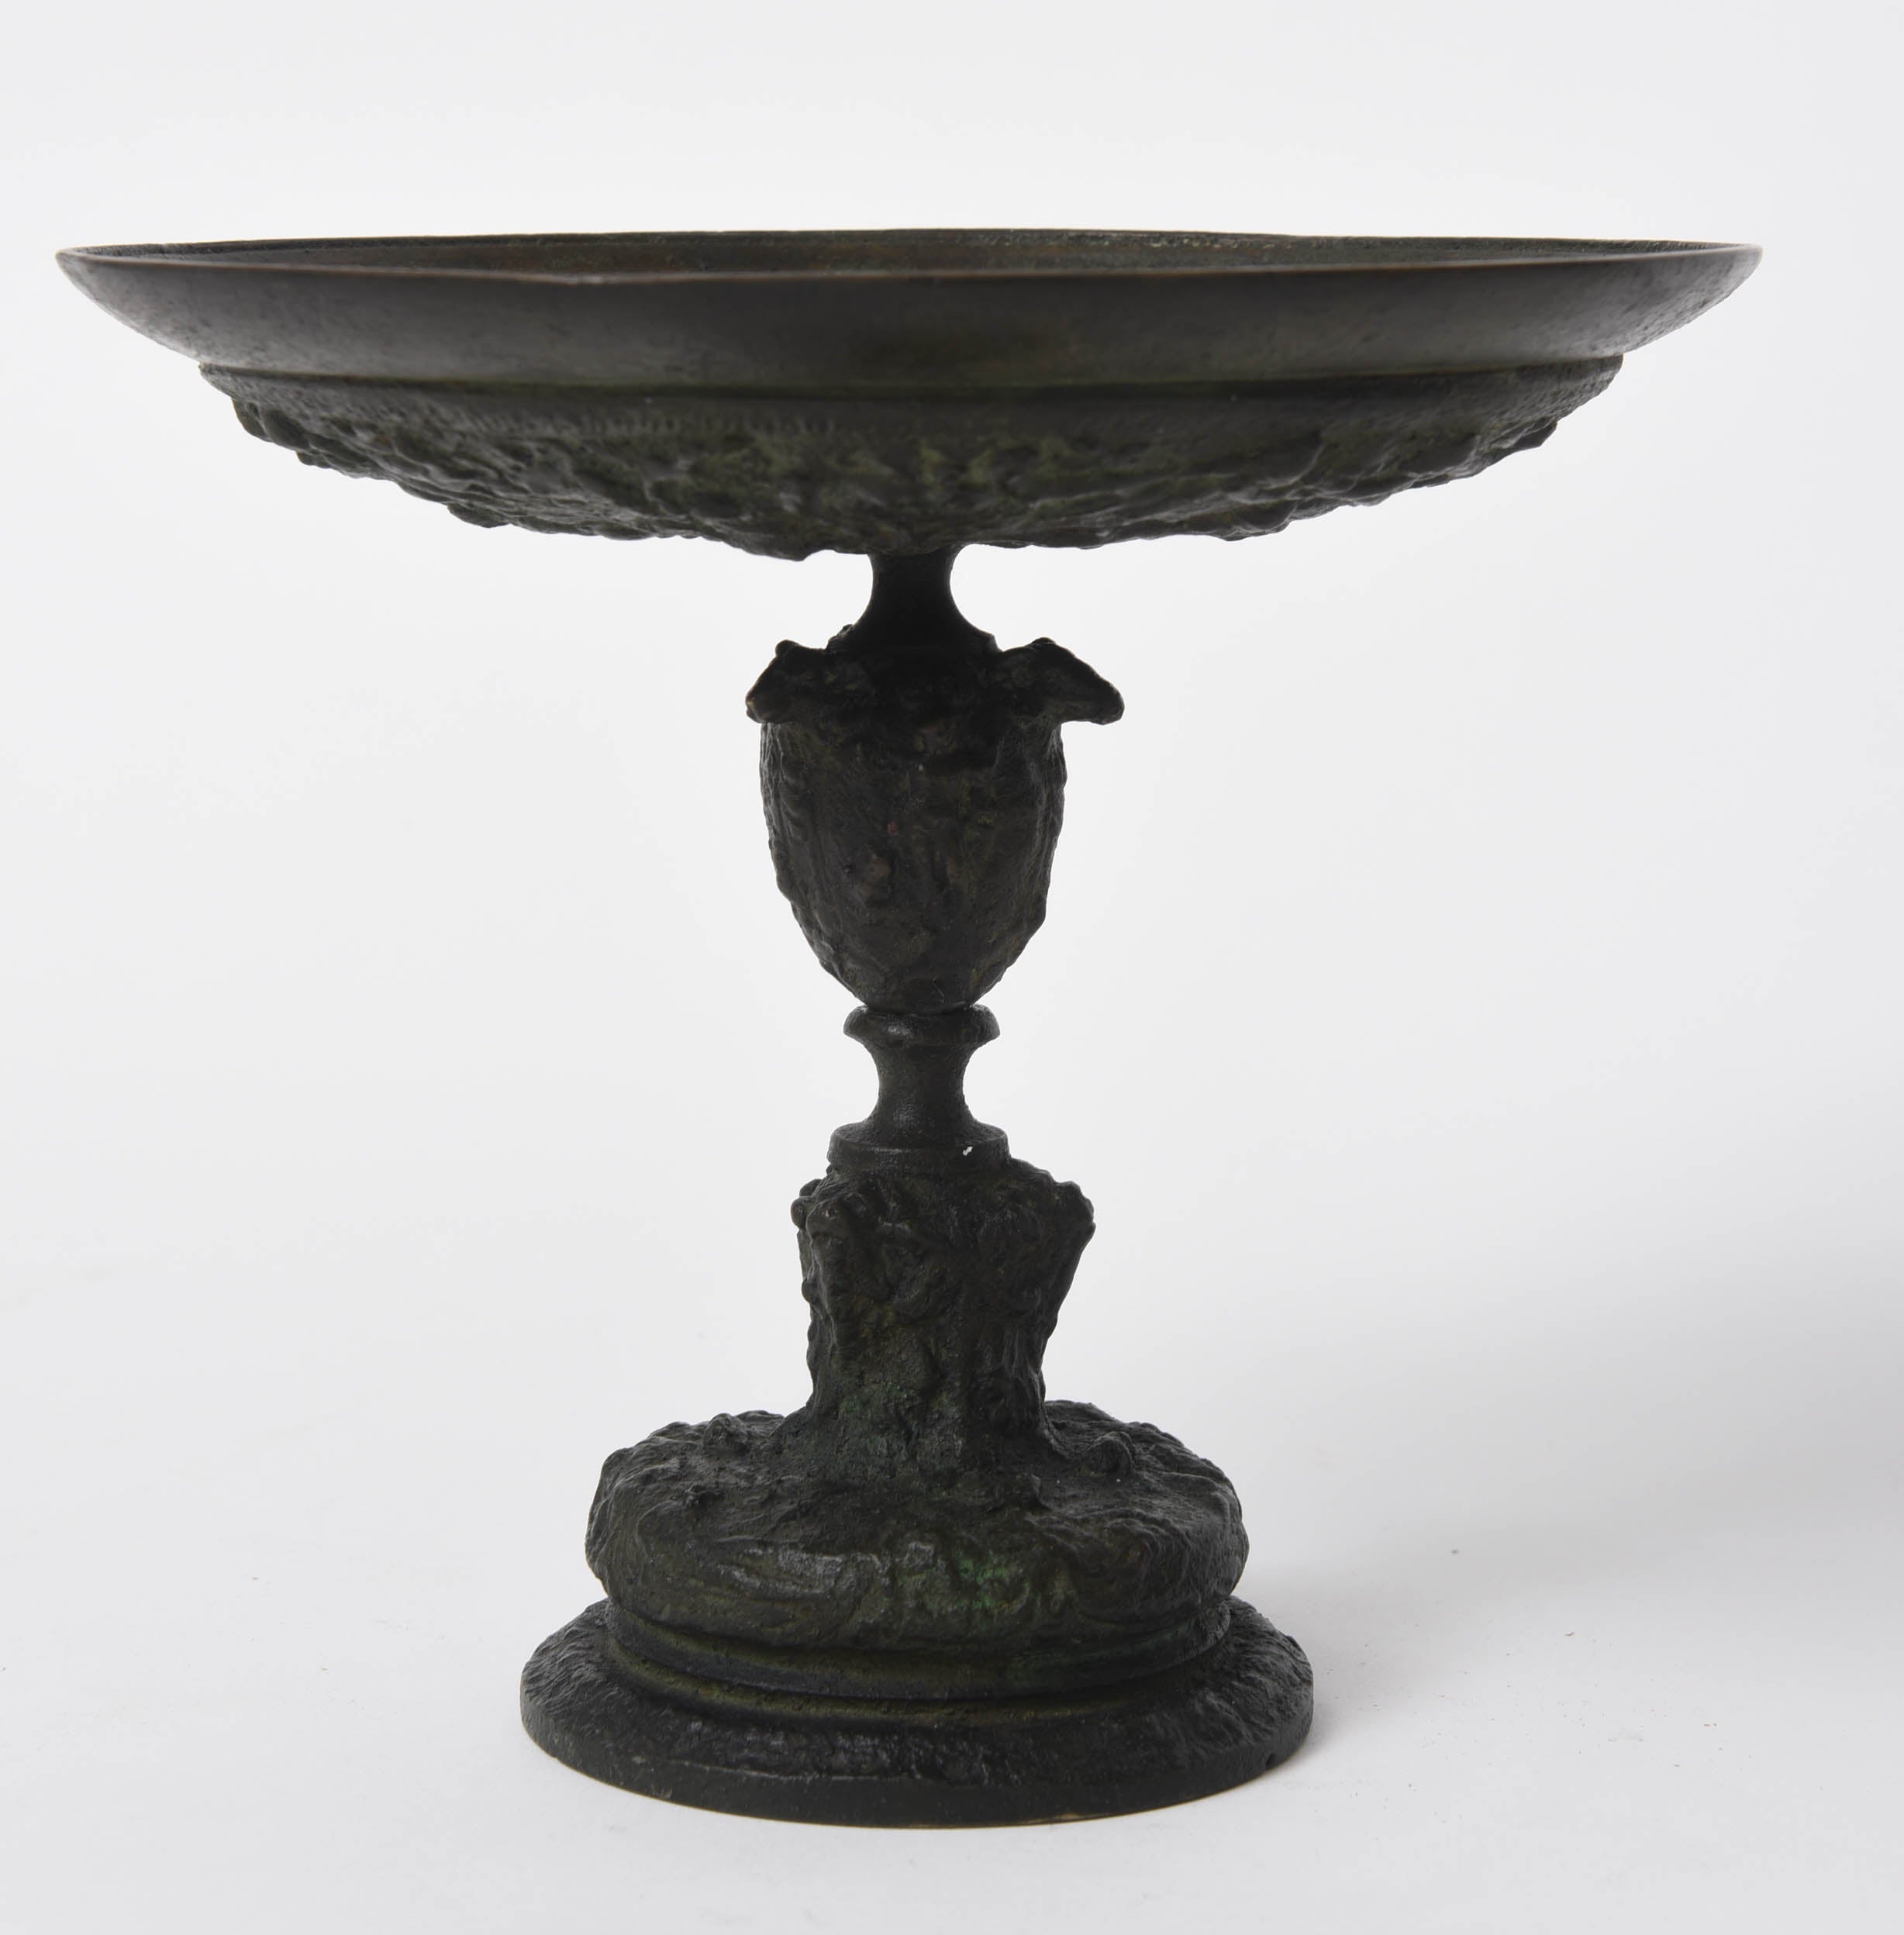 This highly decorative patinated bronze tazza in 16th century Italian style is covered above and below with low relief figures depicting tritons, mermaids and mermen battling at sea.   The stem of the tazza is decorated with a continuous frieze of